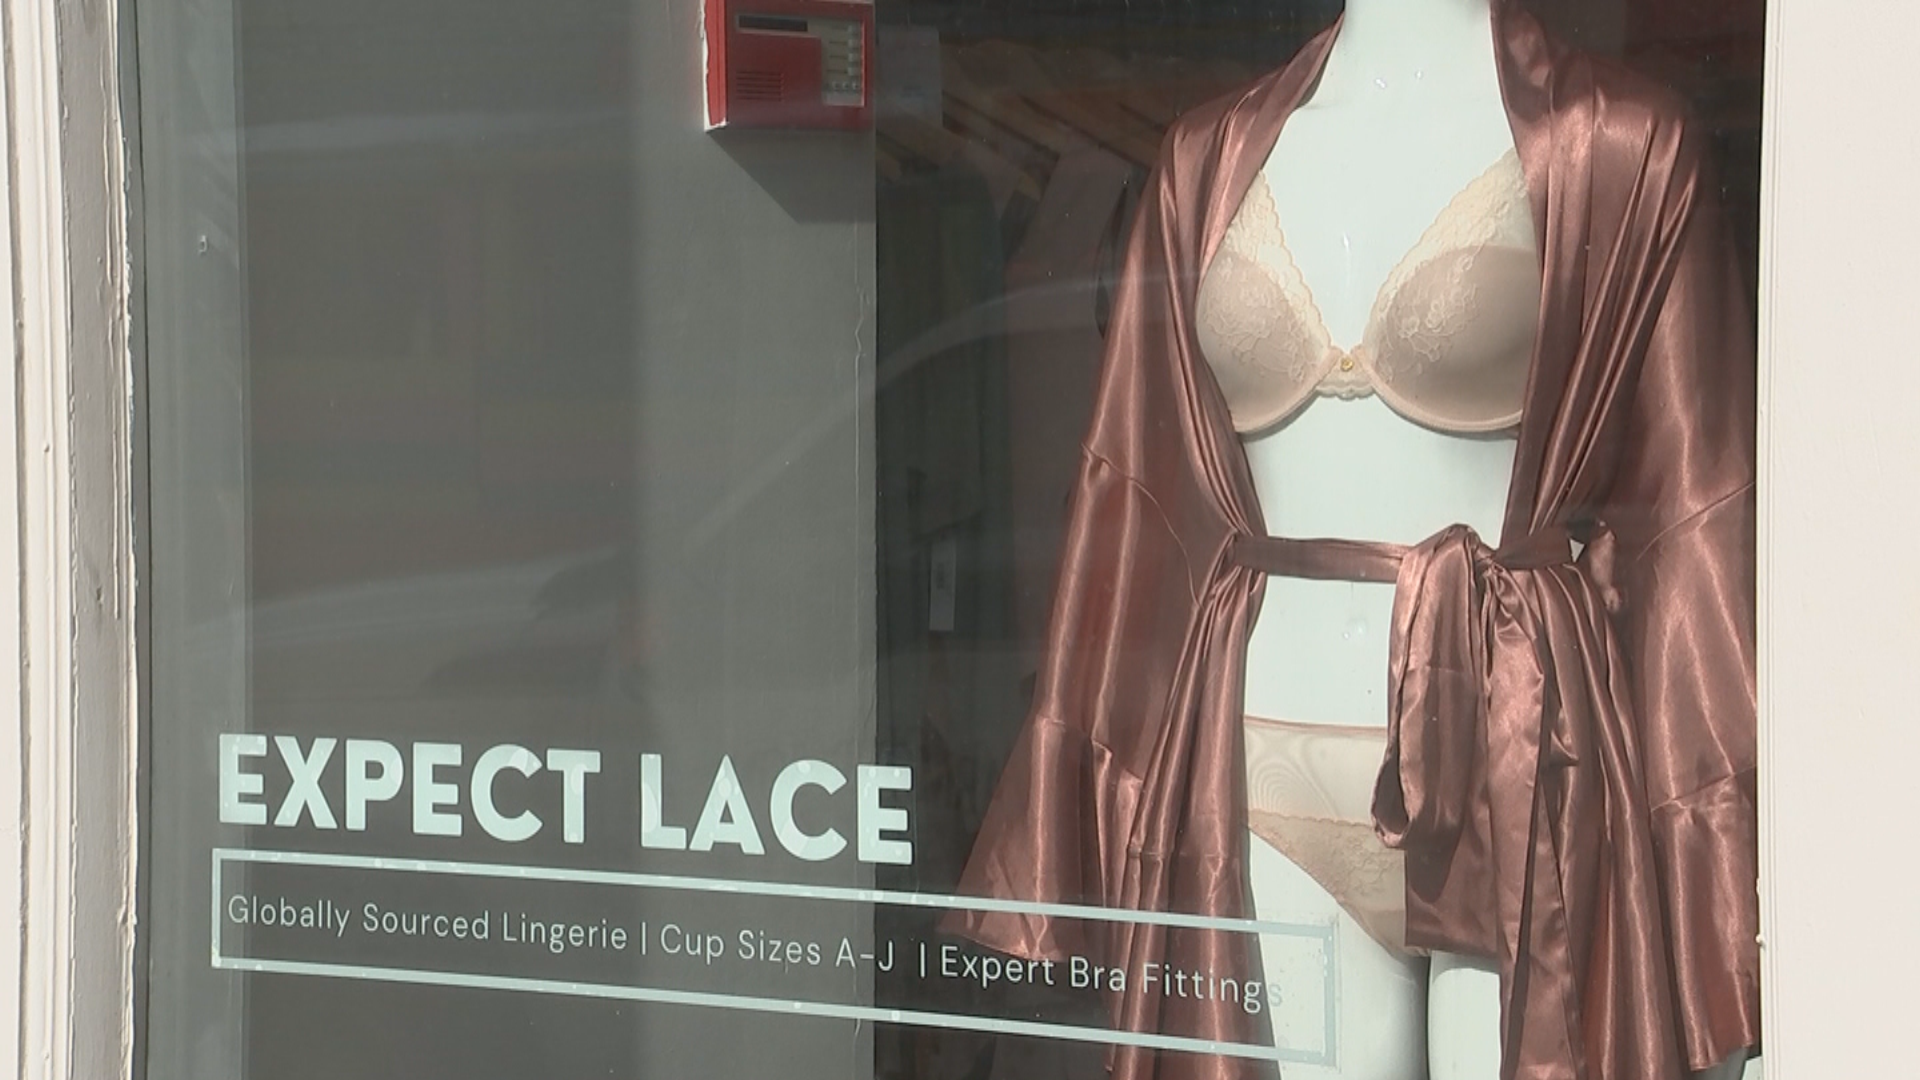 Expect Lace: Manayunk Lingerie Shop Helping Women Feel Better